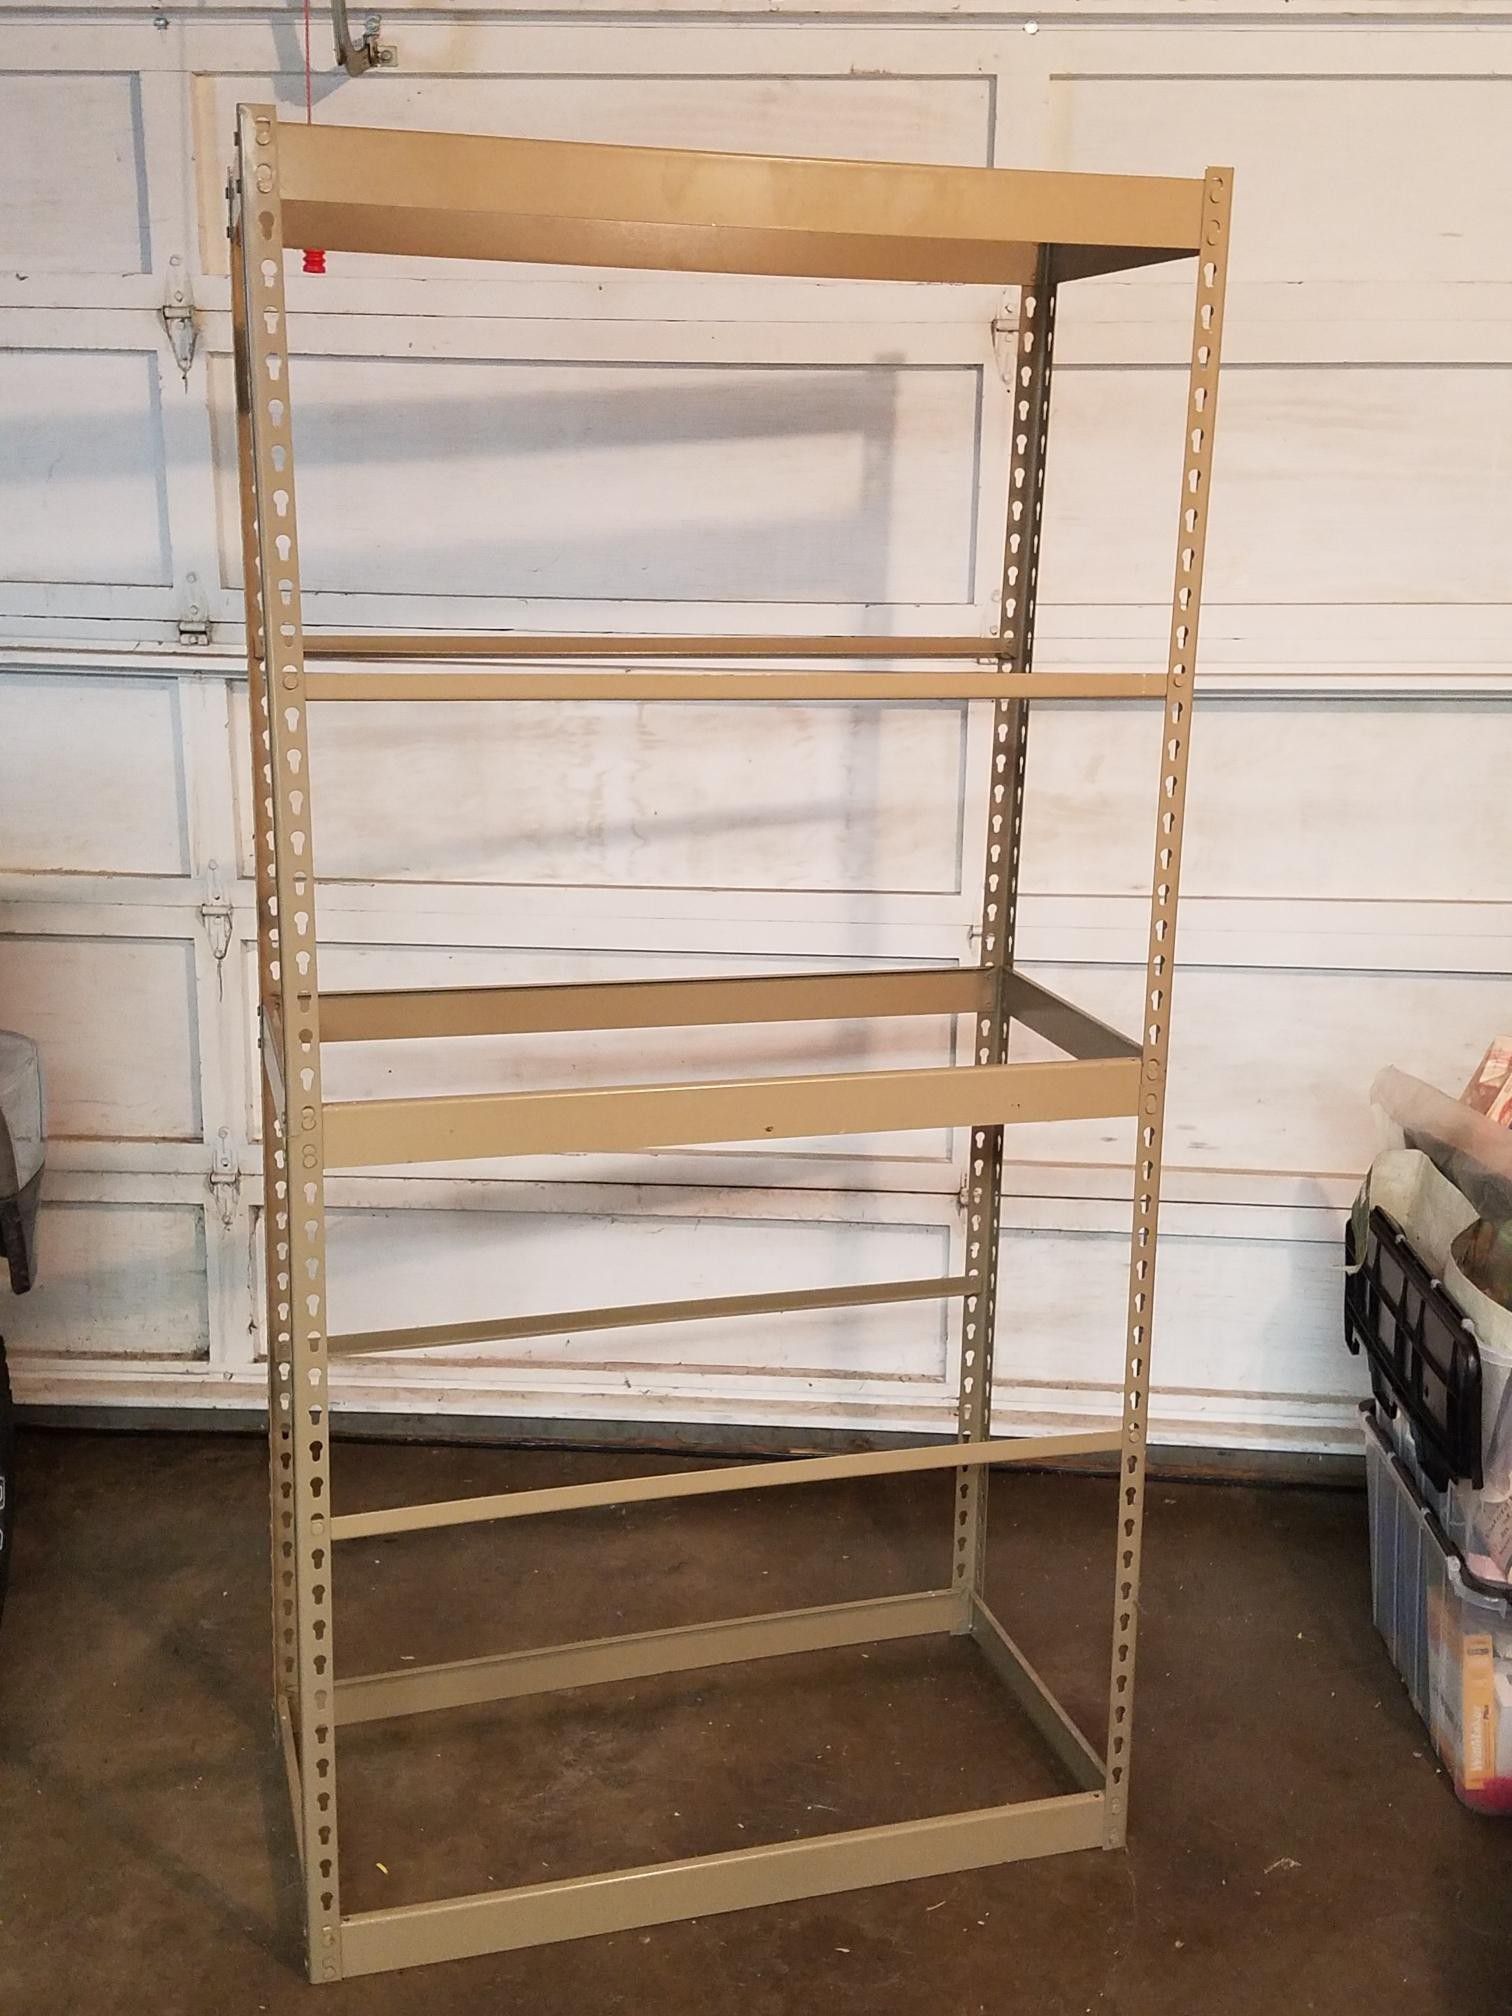 Gorilla Rack for Sale in Vancouver, WA - OfferUp